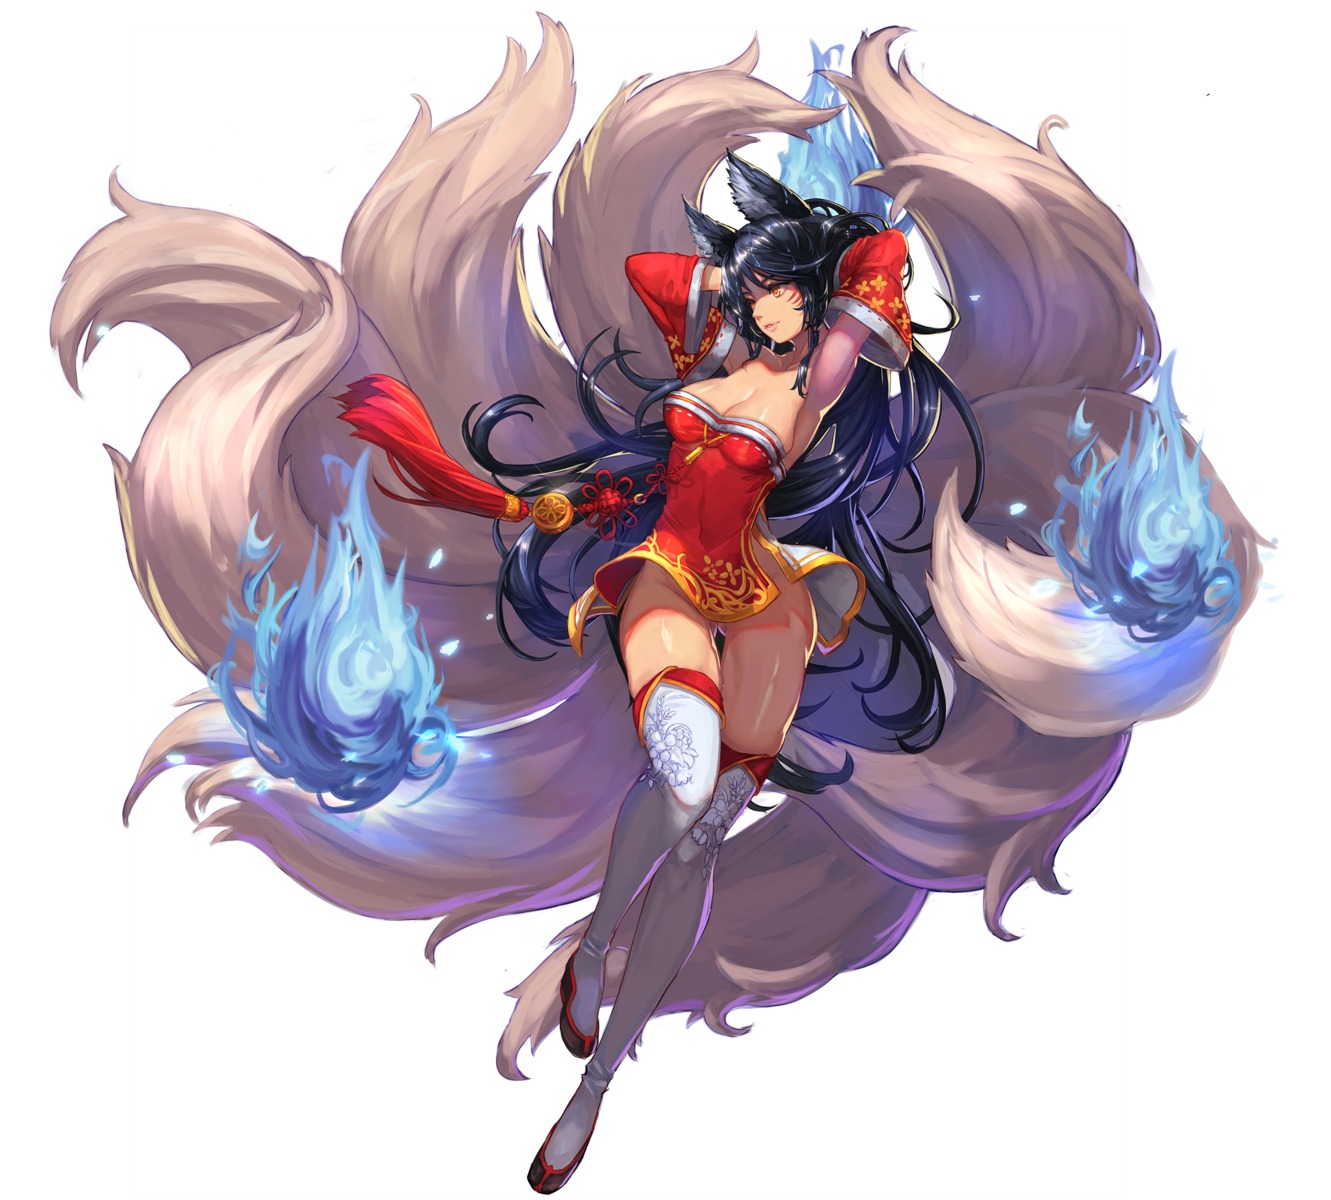 ahri animal_ears cleavage dress kitsune league_of_legends nopan qbspdl tail thighhighs